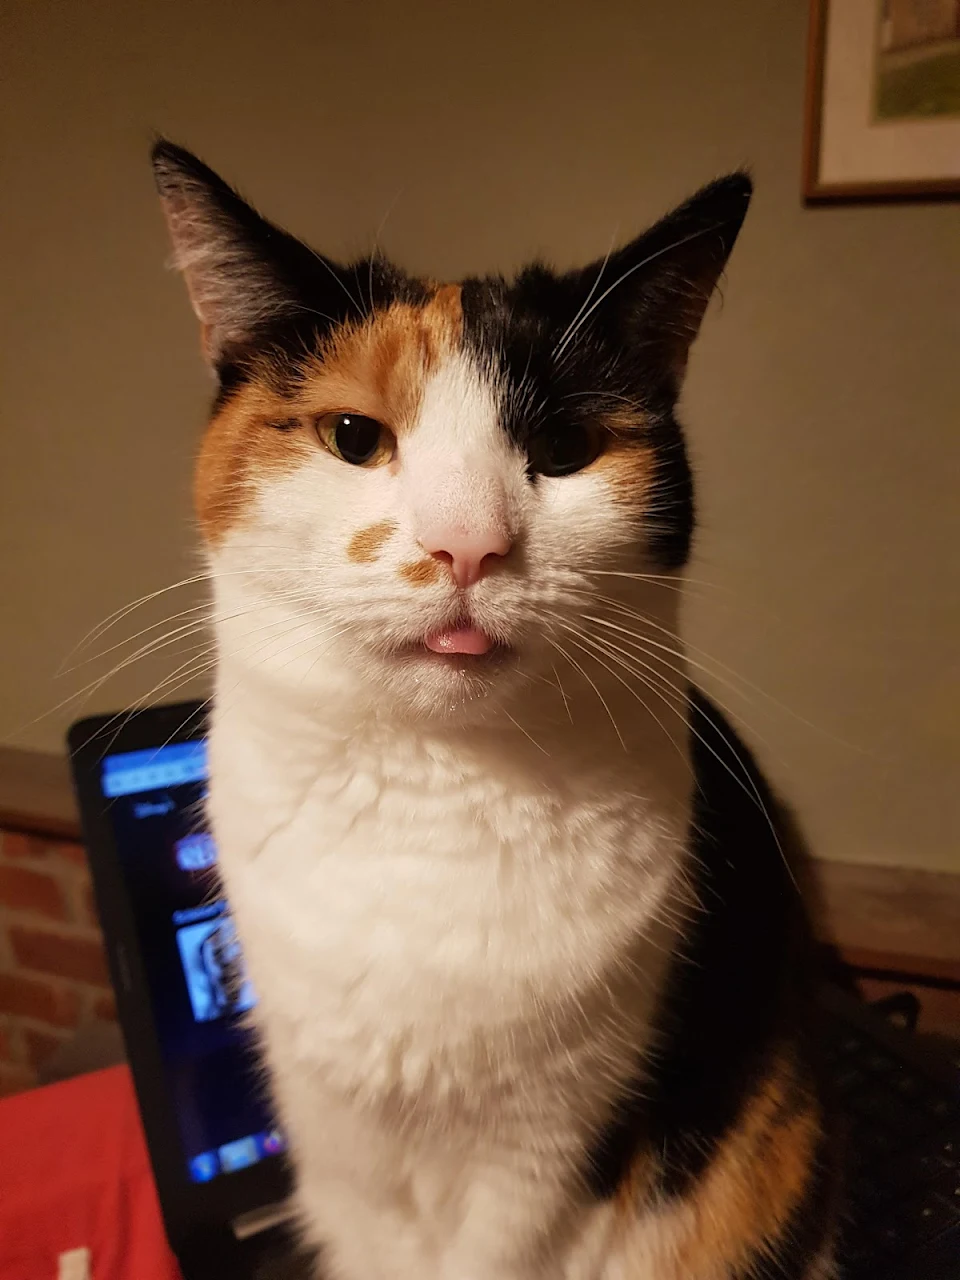 My cat likes to sit on laptops and stick her tongue out to assert her dominance